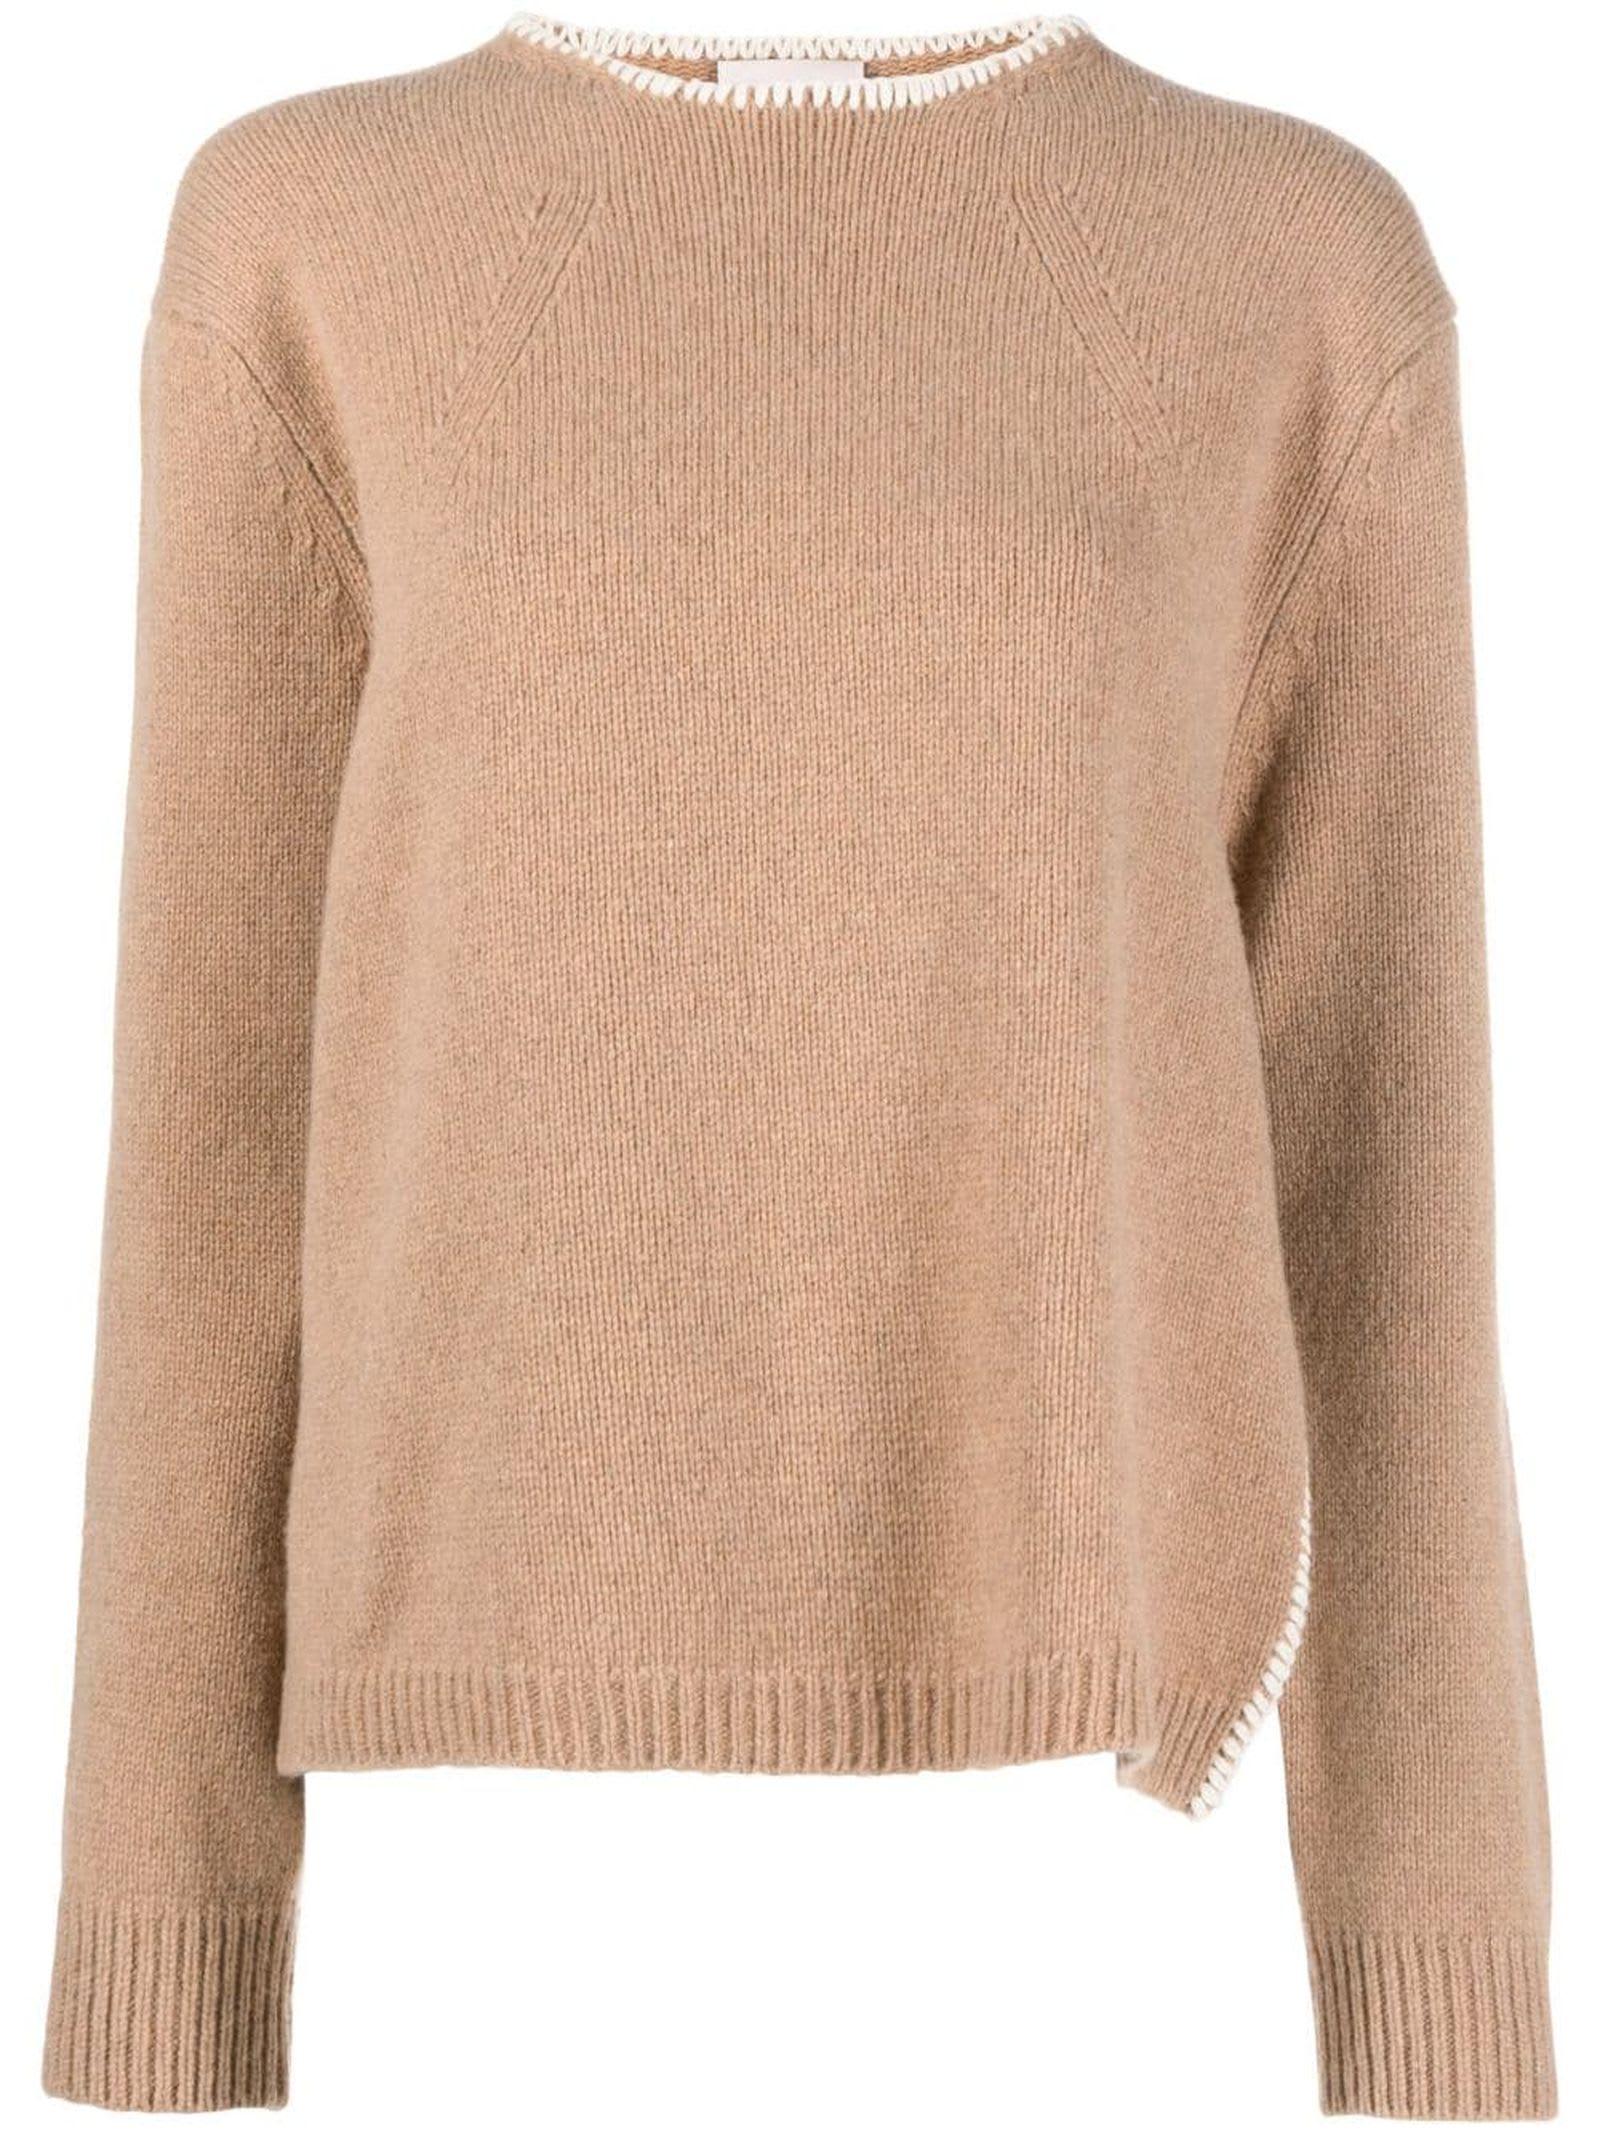 SEMICOUTURE LIGHT BROWN RECYCLED CASHMERE JUMPER